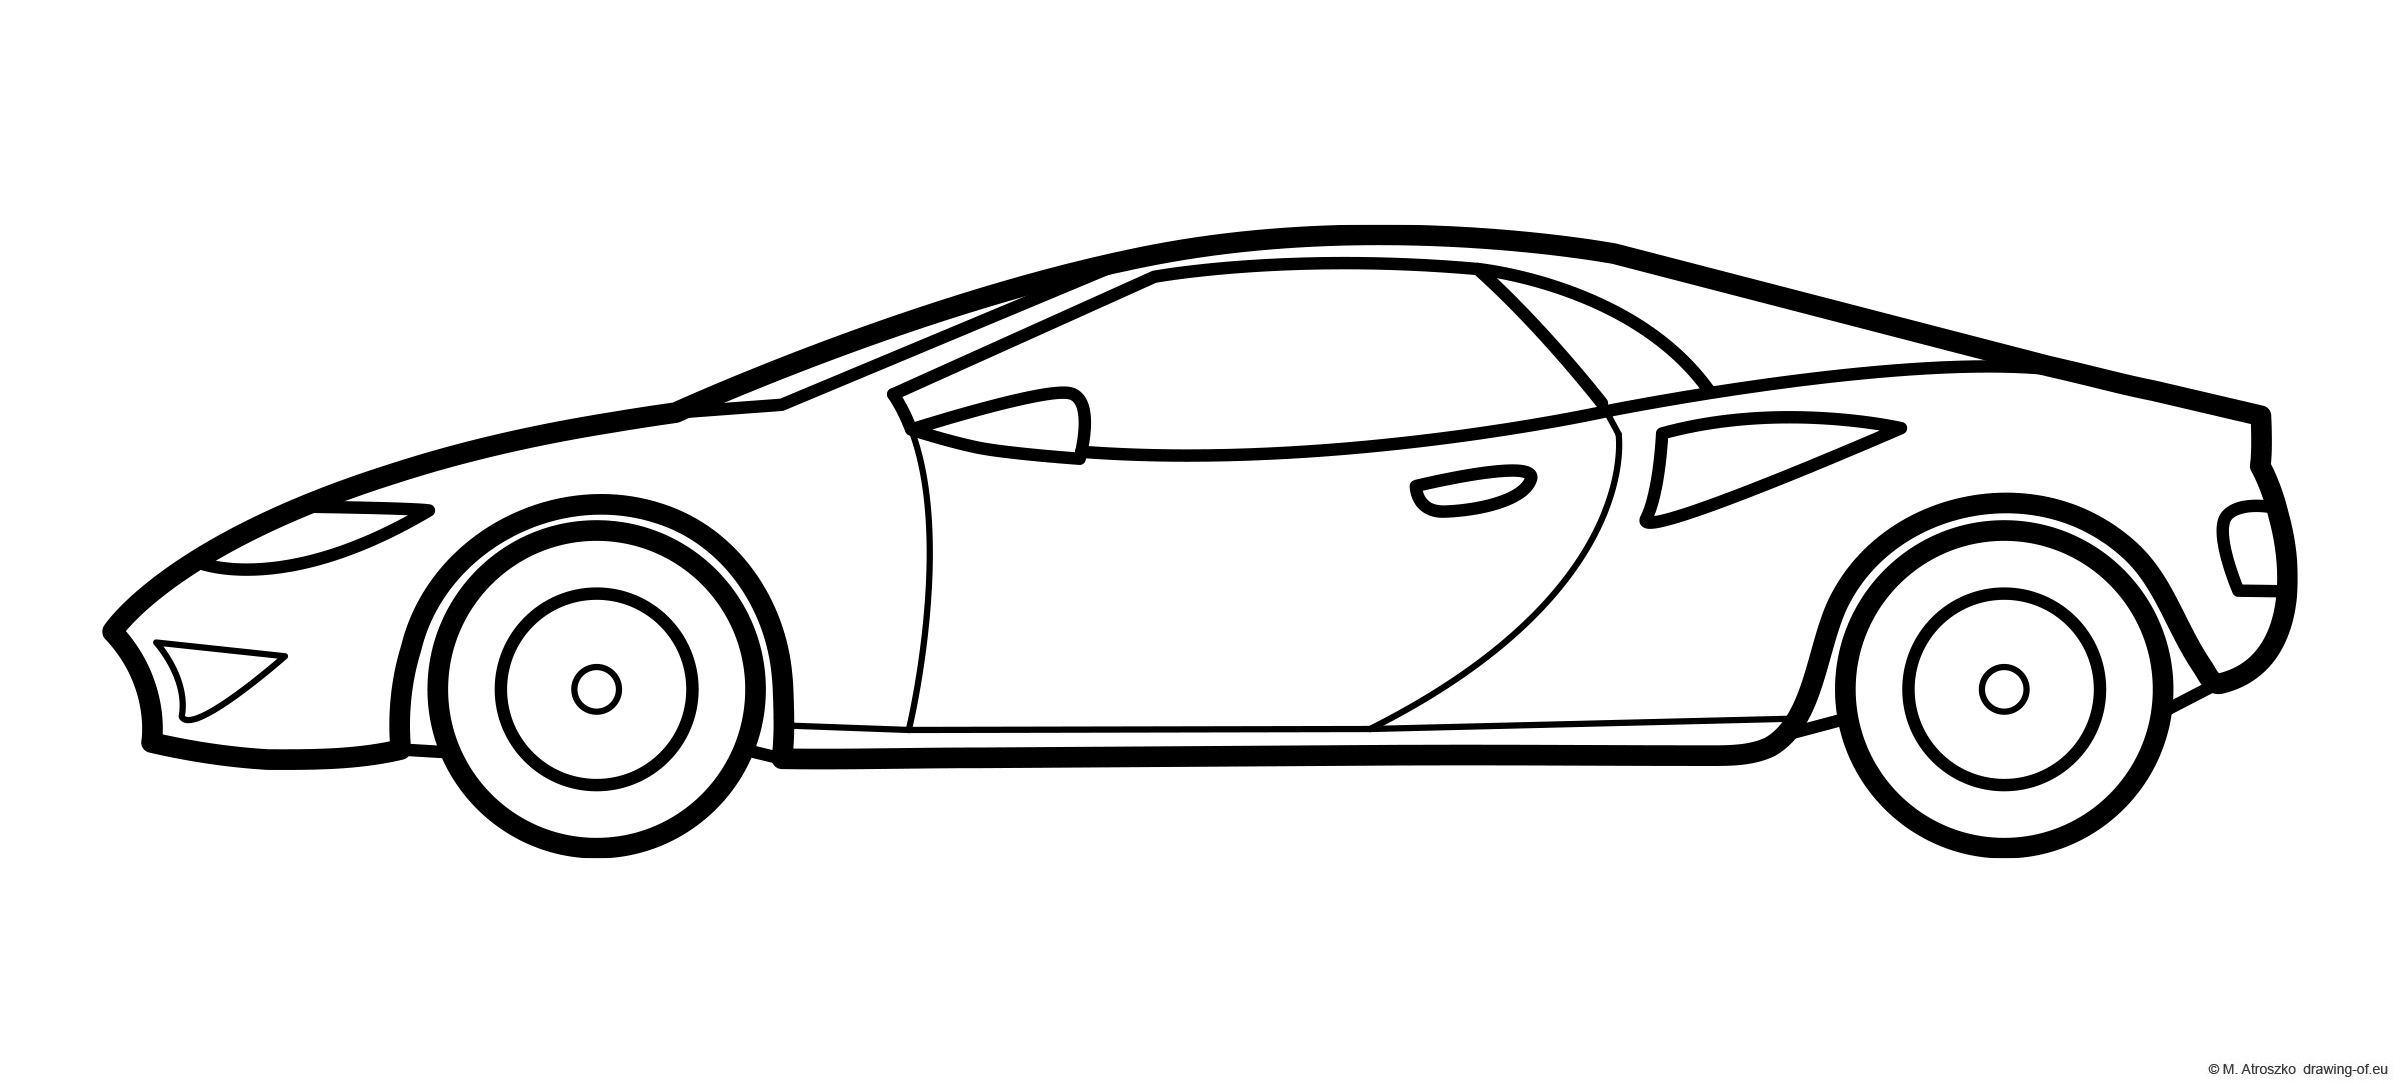 Sport car coloring page